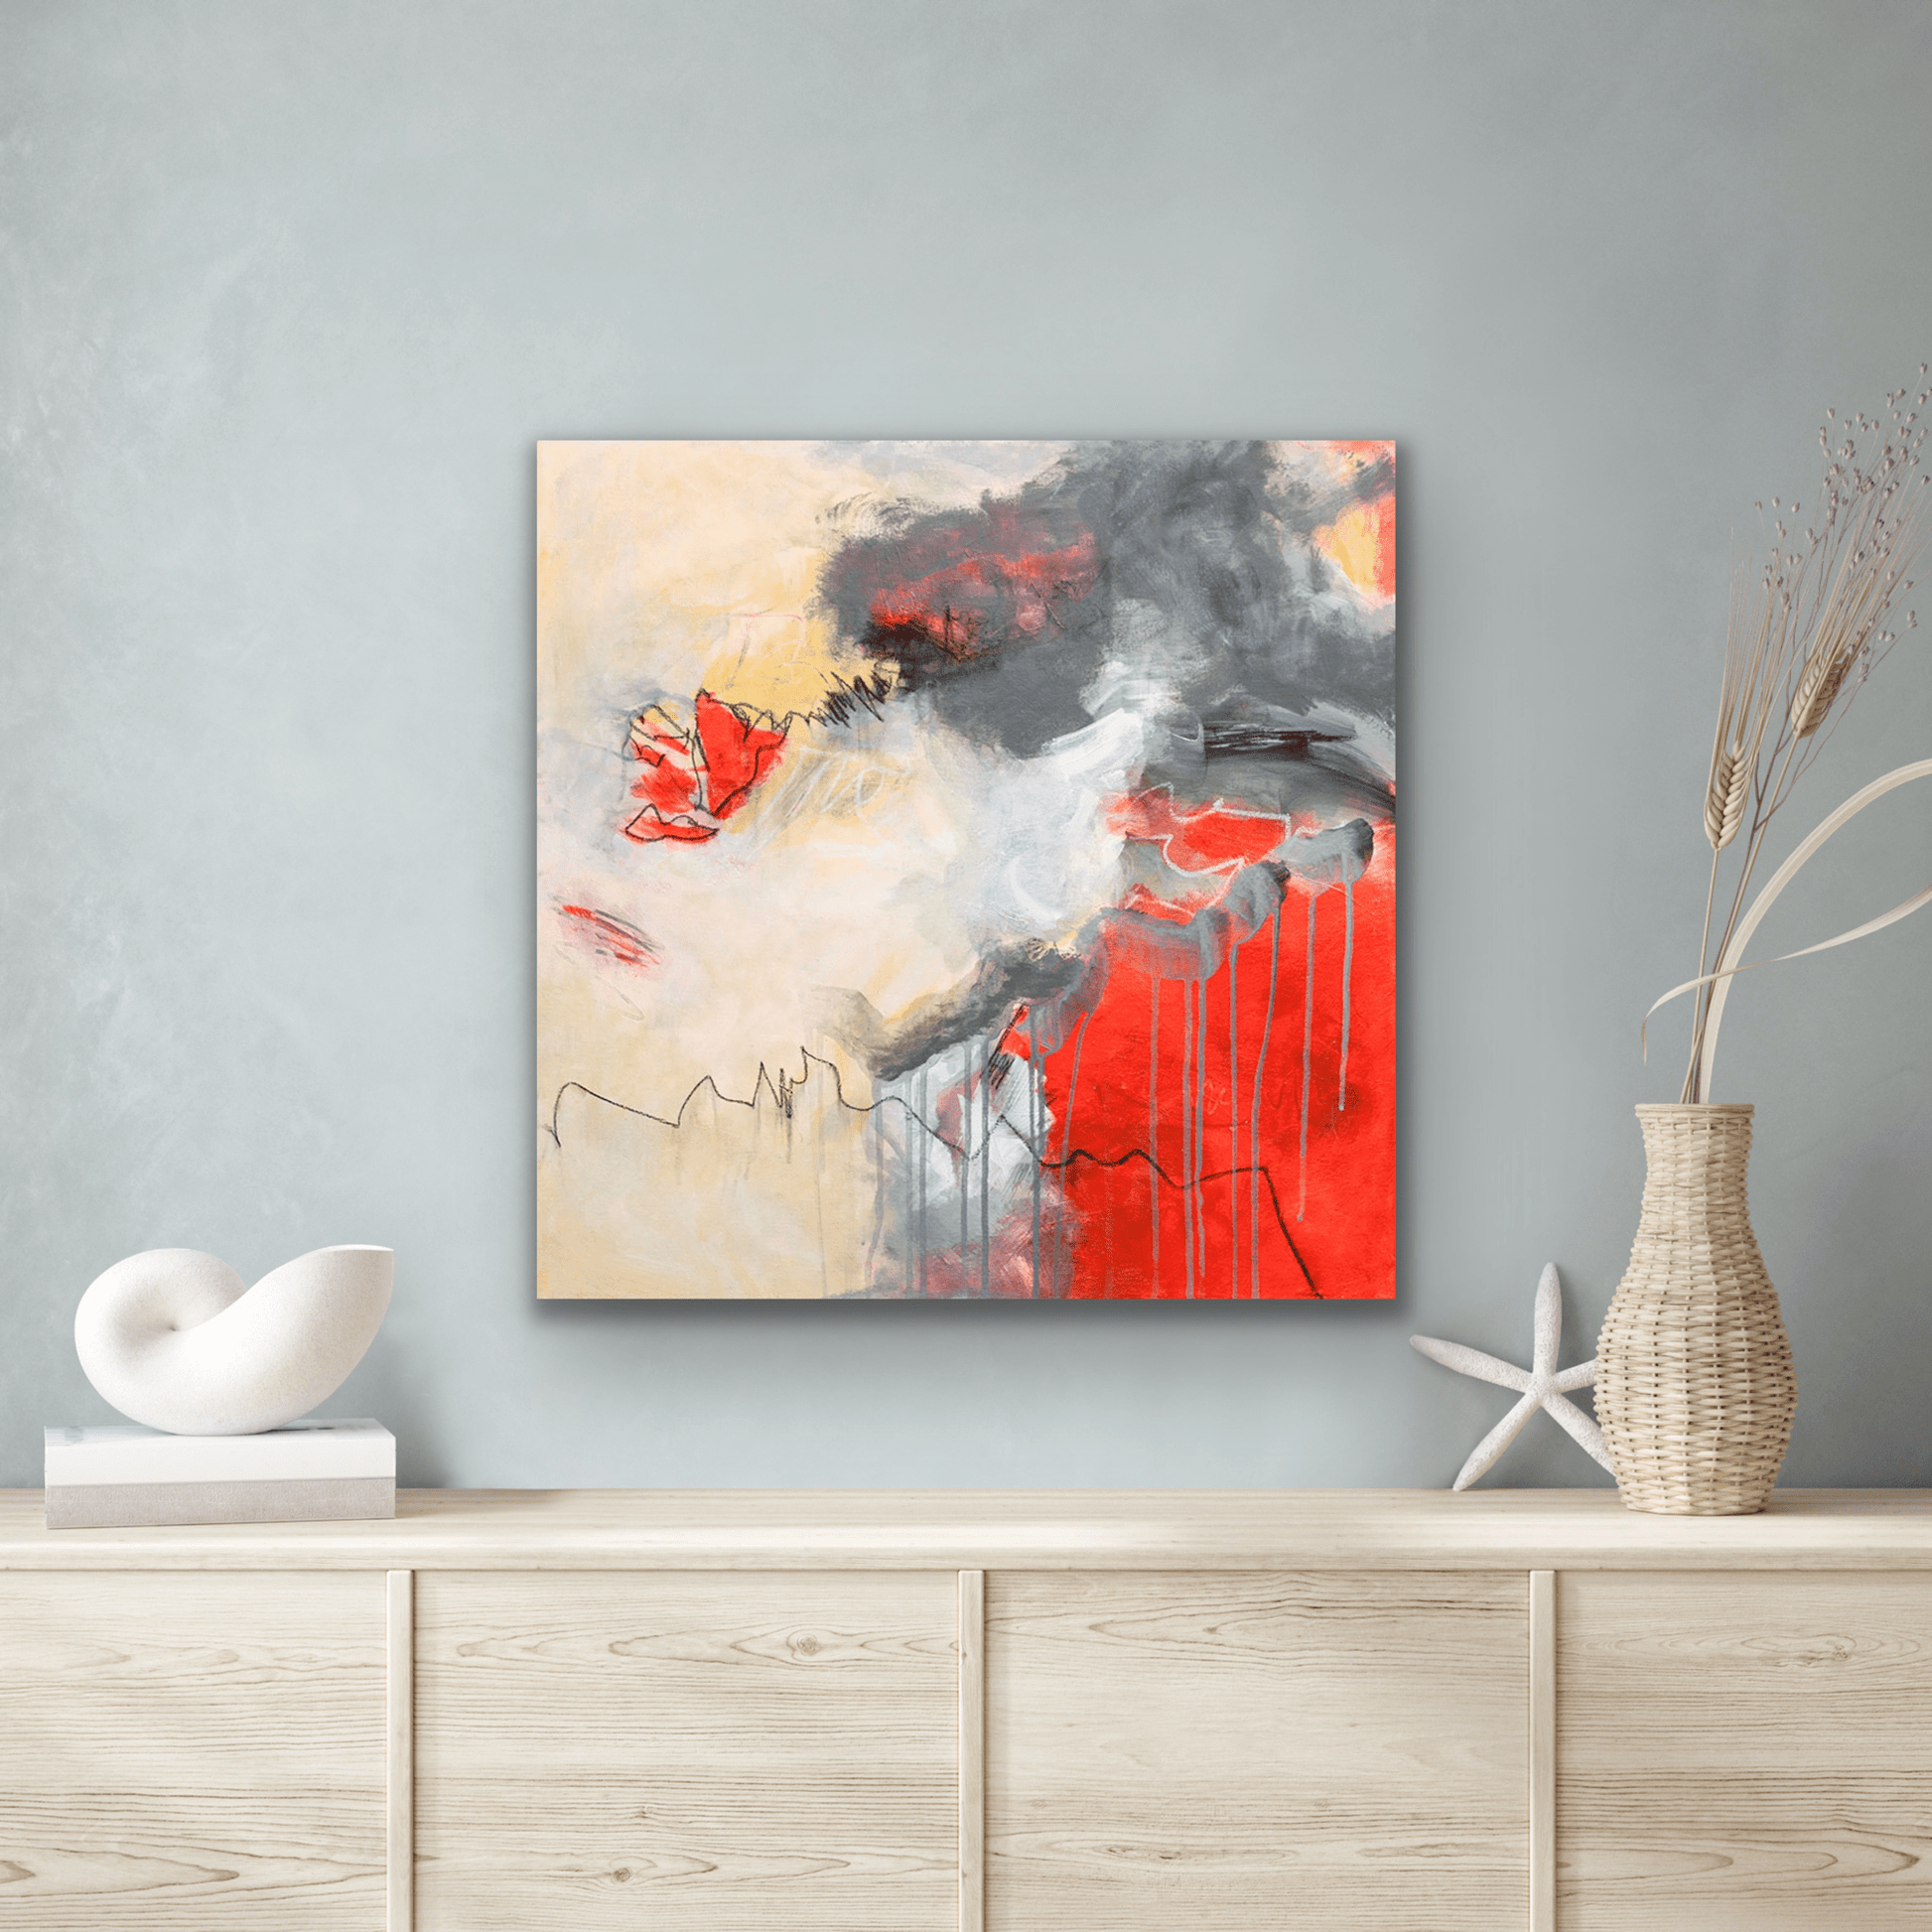 "Chaos Thinking" original artwork has a colour palette that includes a bright orange red, yellows and greys.